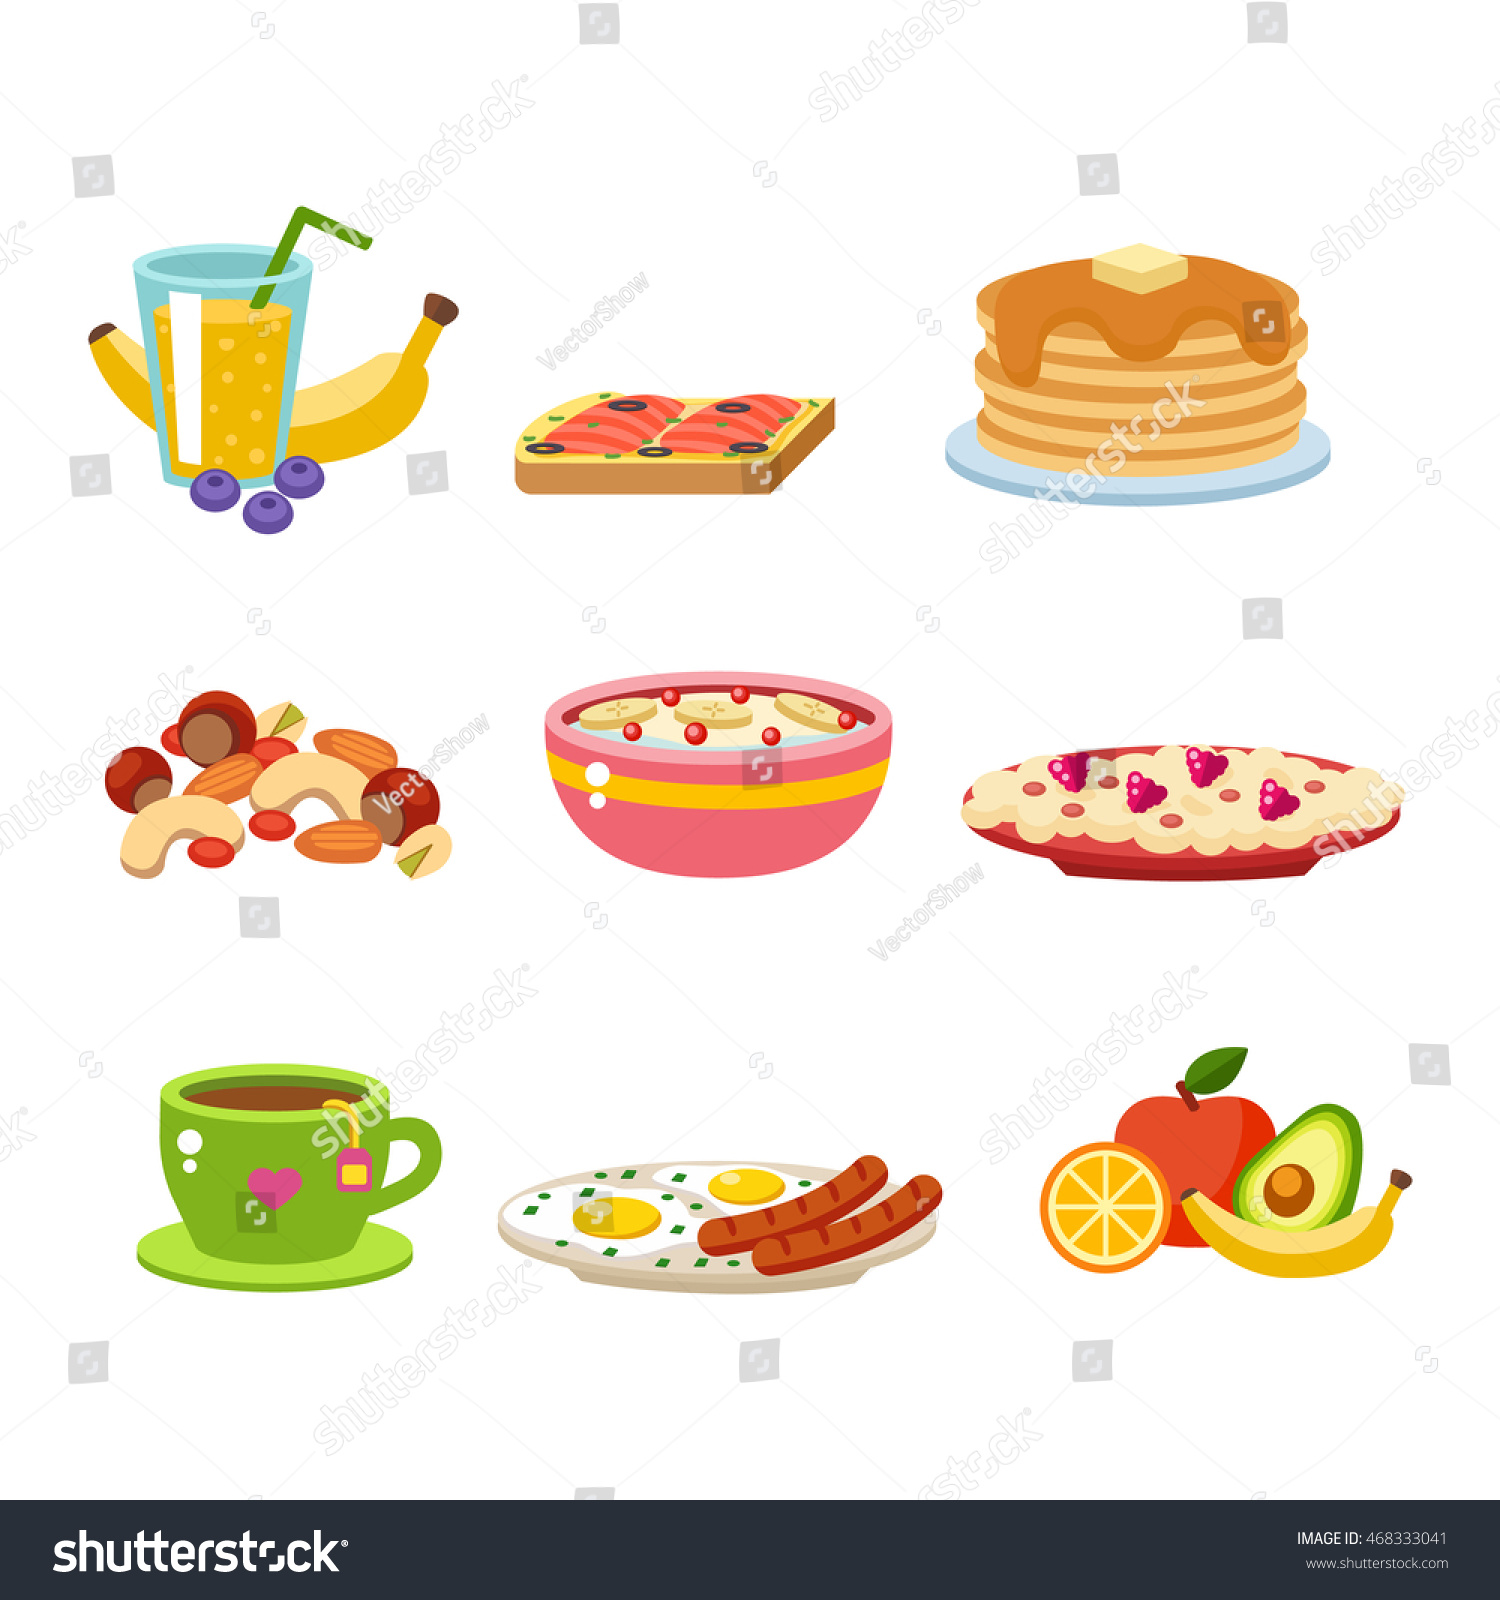 Healthy Nutrition Proteins Fats Carbohydrates Breakfast Stock Vector Royalty Free 468333041 8206